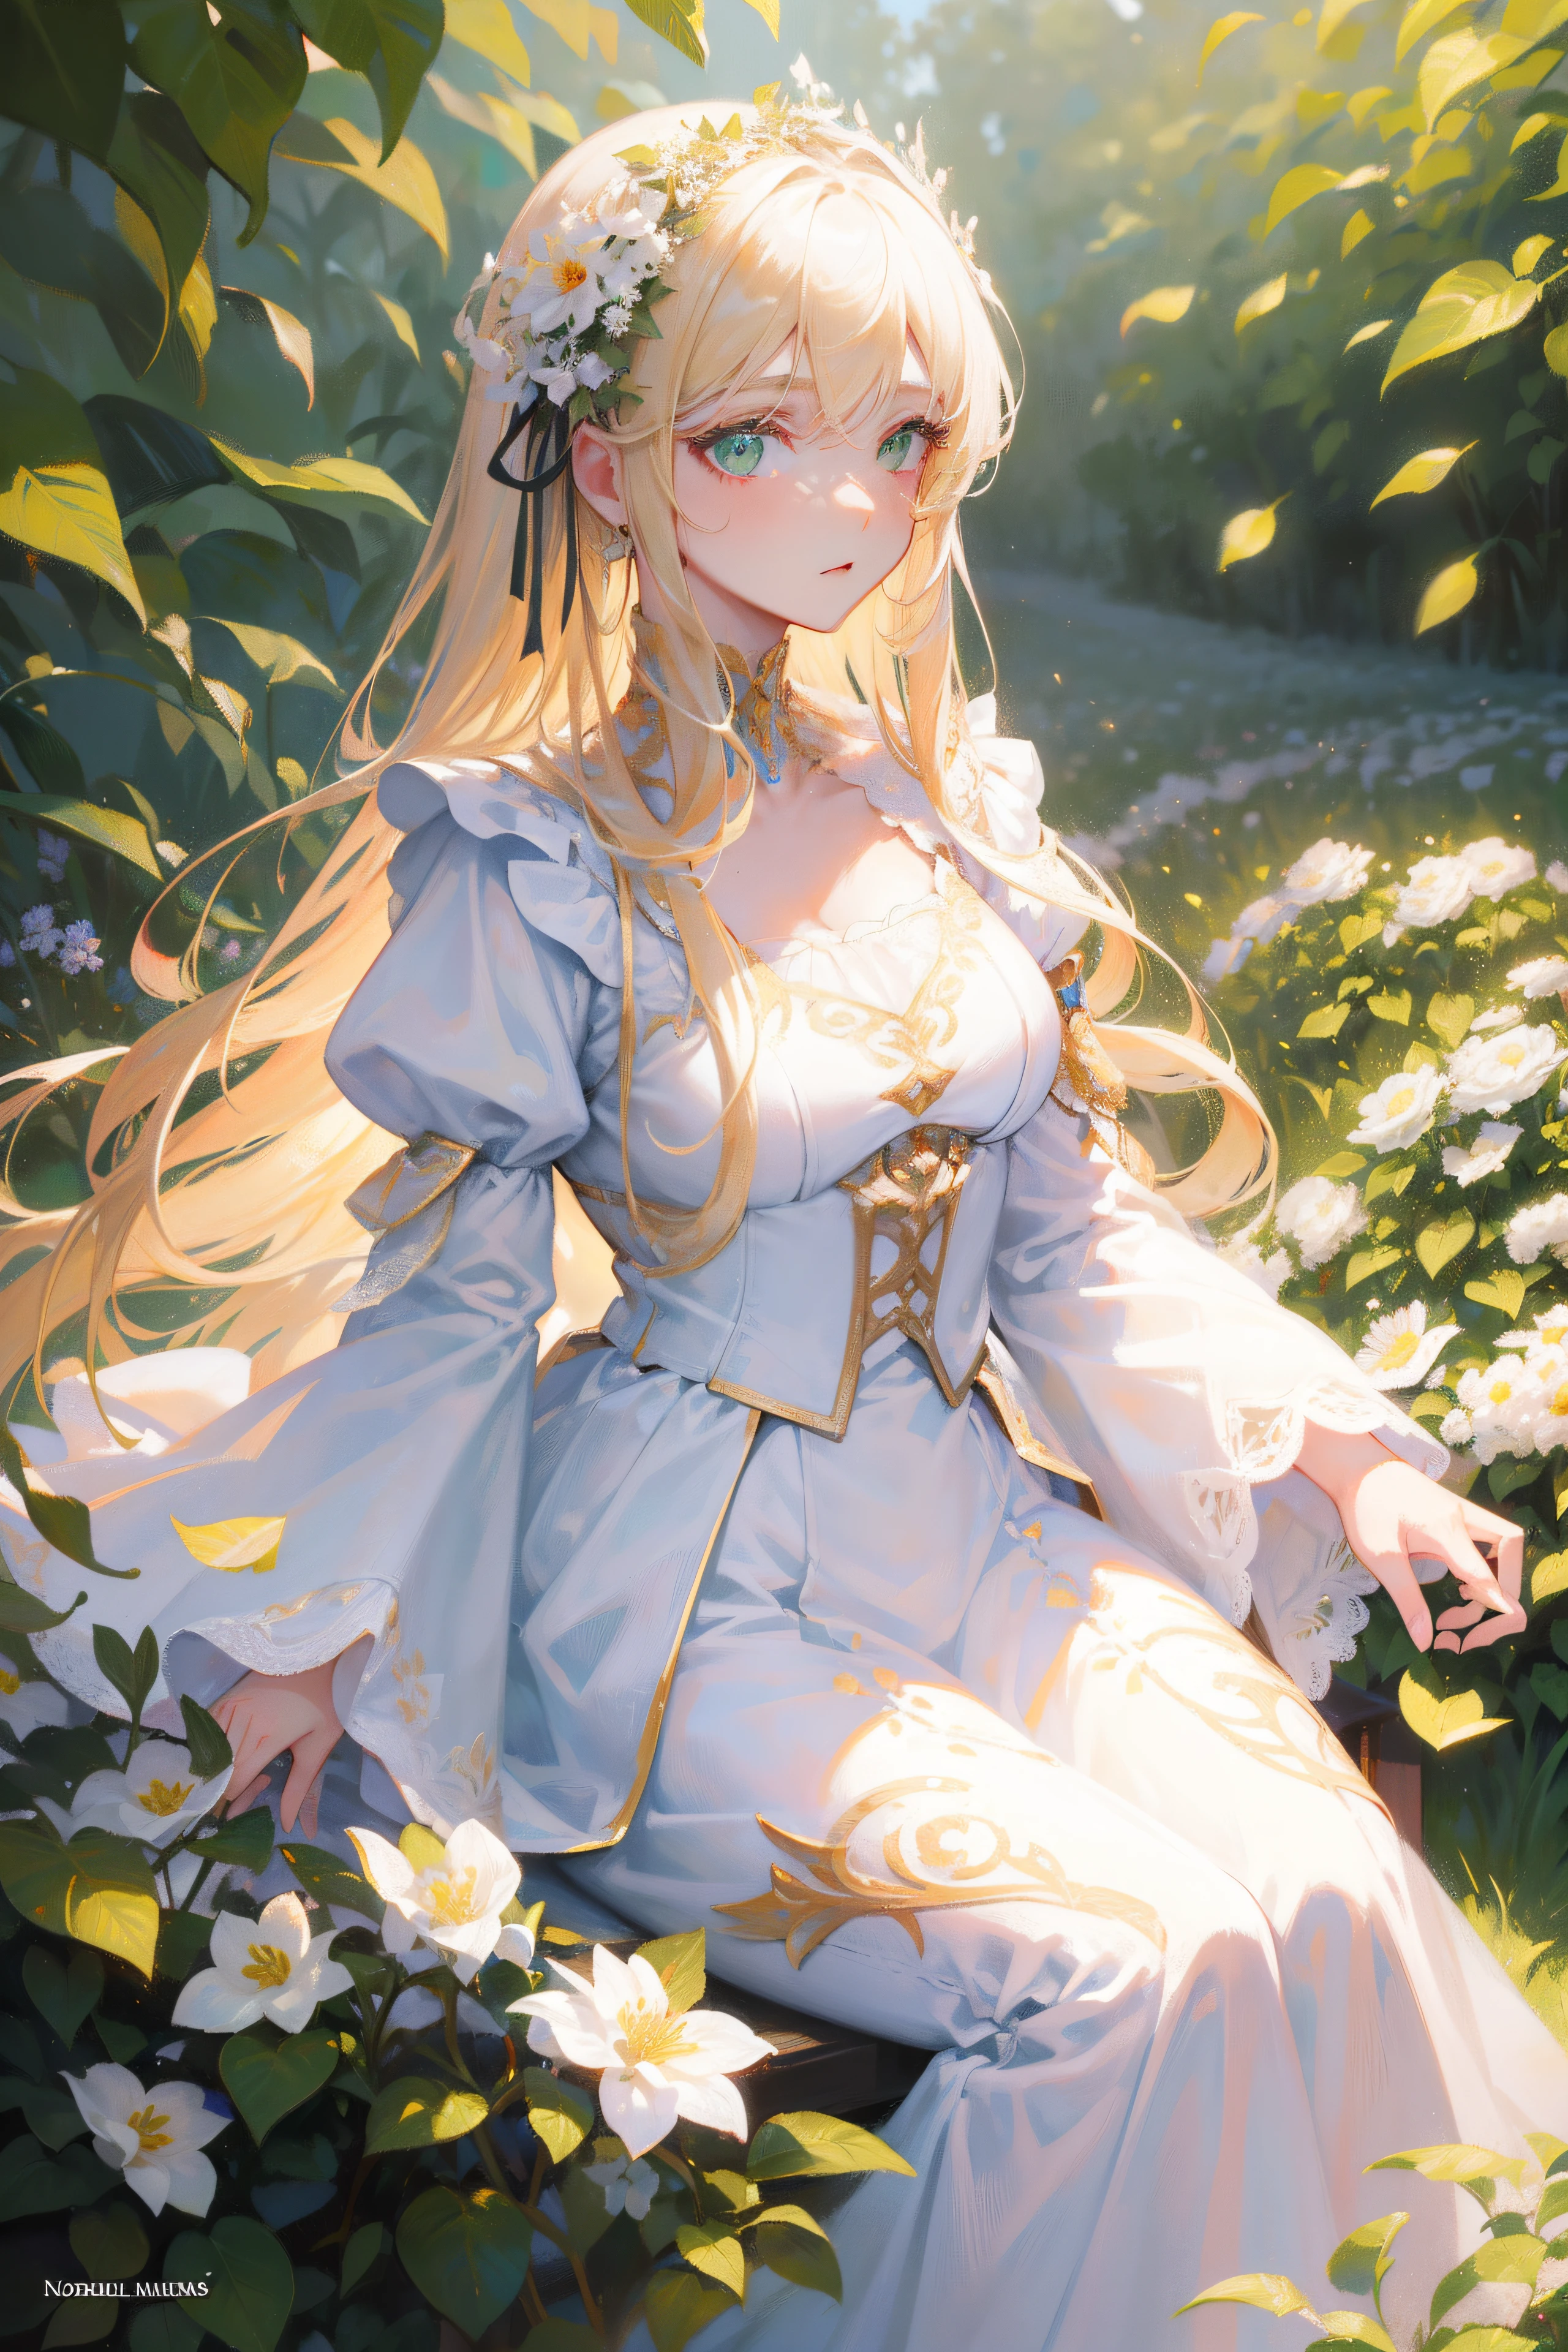 35 mm, Incredibly hyper-detailed and intricately realistic, full body character, Adult, Beautiful, Female, Perfect, Long Blonde Hair, Green eyes, Elegant white dress, flower in hair, Detailed face, White skin, Mature facial features of female Nordica, Garden background, Cover art, zoomout, Choker, hyper detailed painting, luminism, Bar lighting, with an intricate, 4k resolution concept art portrait